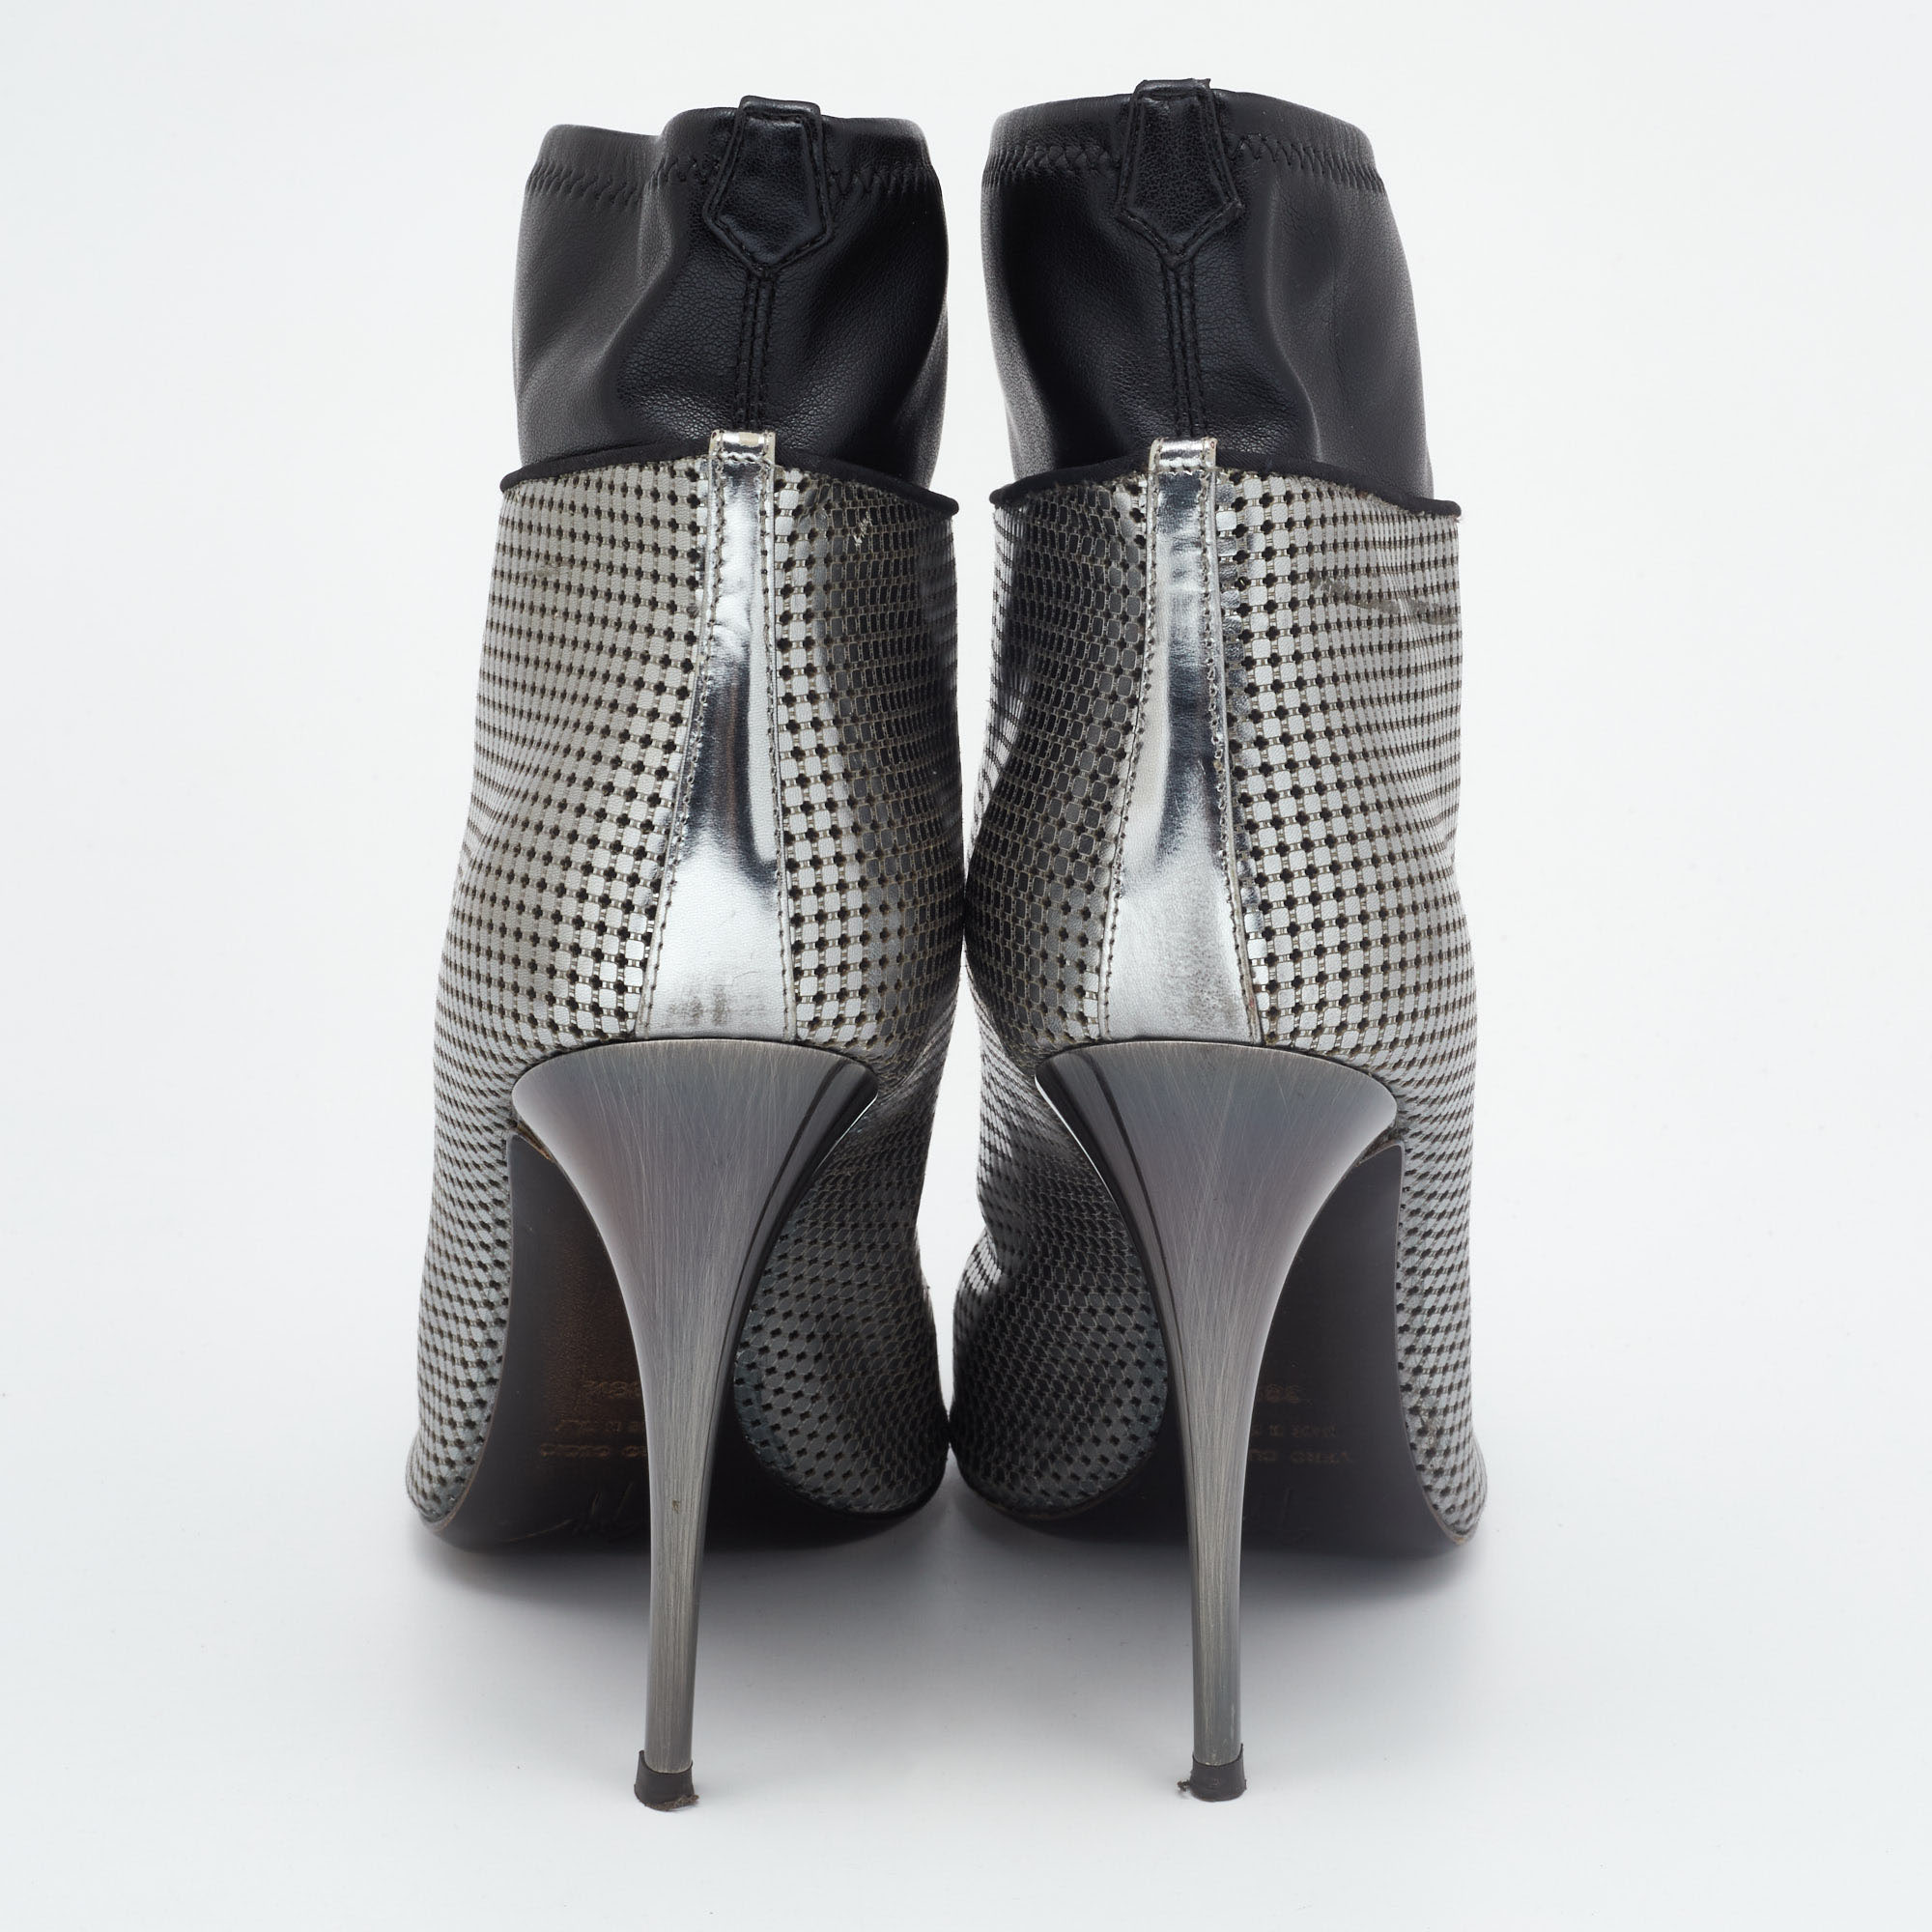 Giuseppe Zanotti Silver/Black Perforated Leather Open Toe Ankle Booties Size 38.5